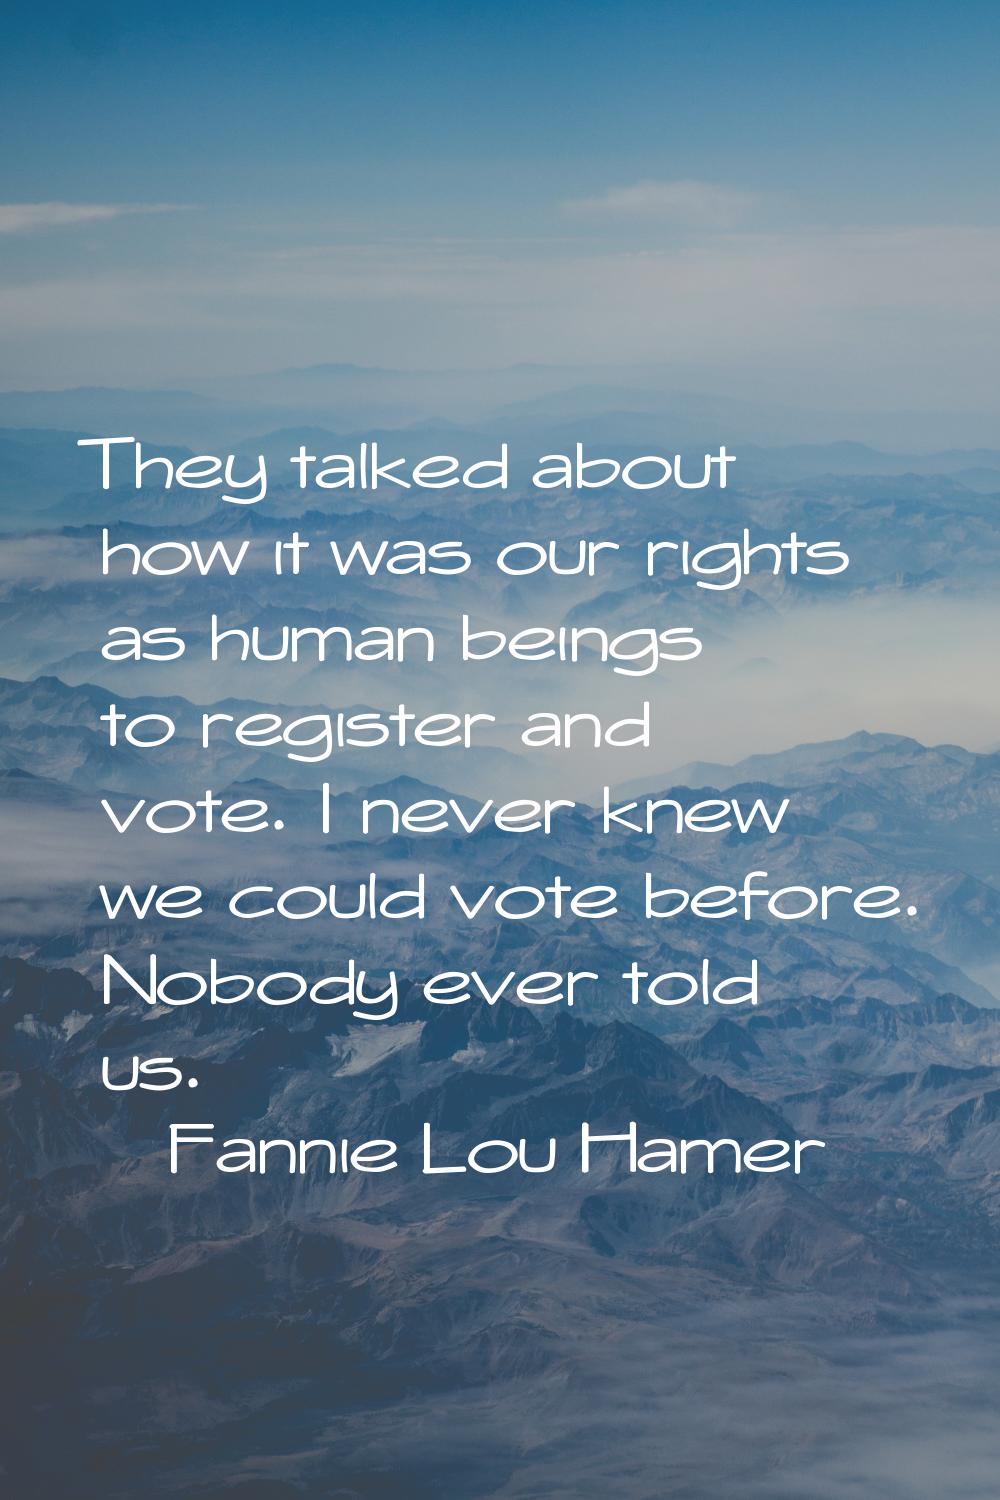 They talked about how it was our rights as human beings to register and vote. I never knew we could